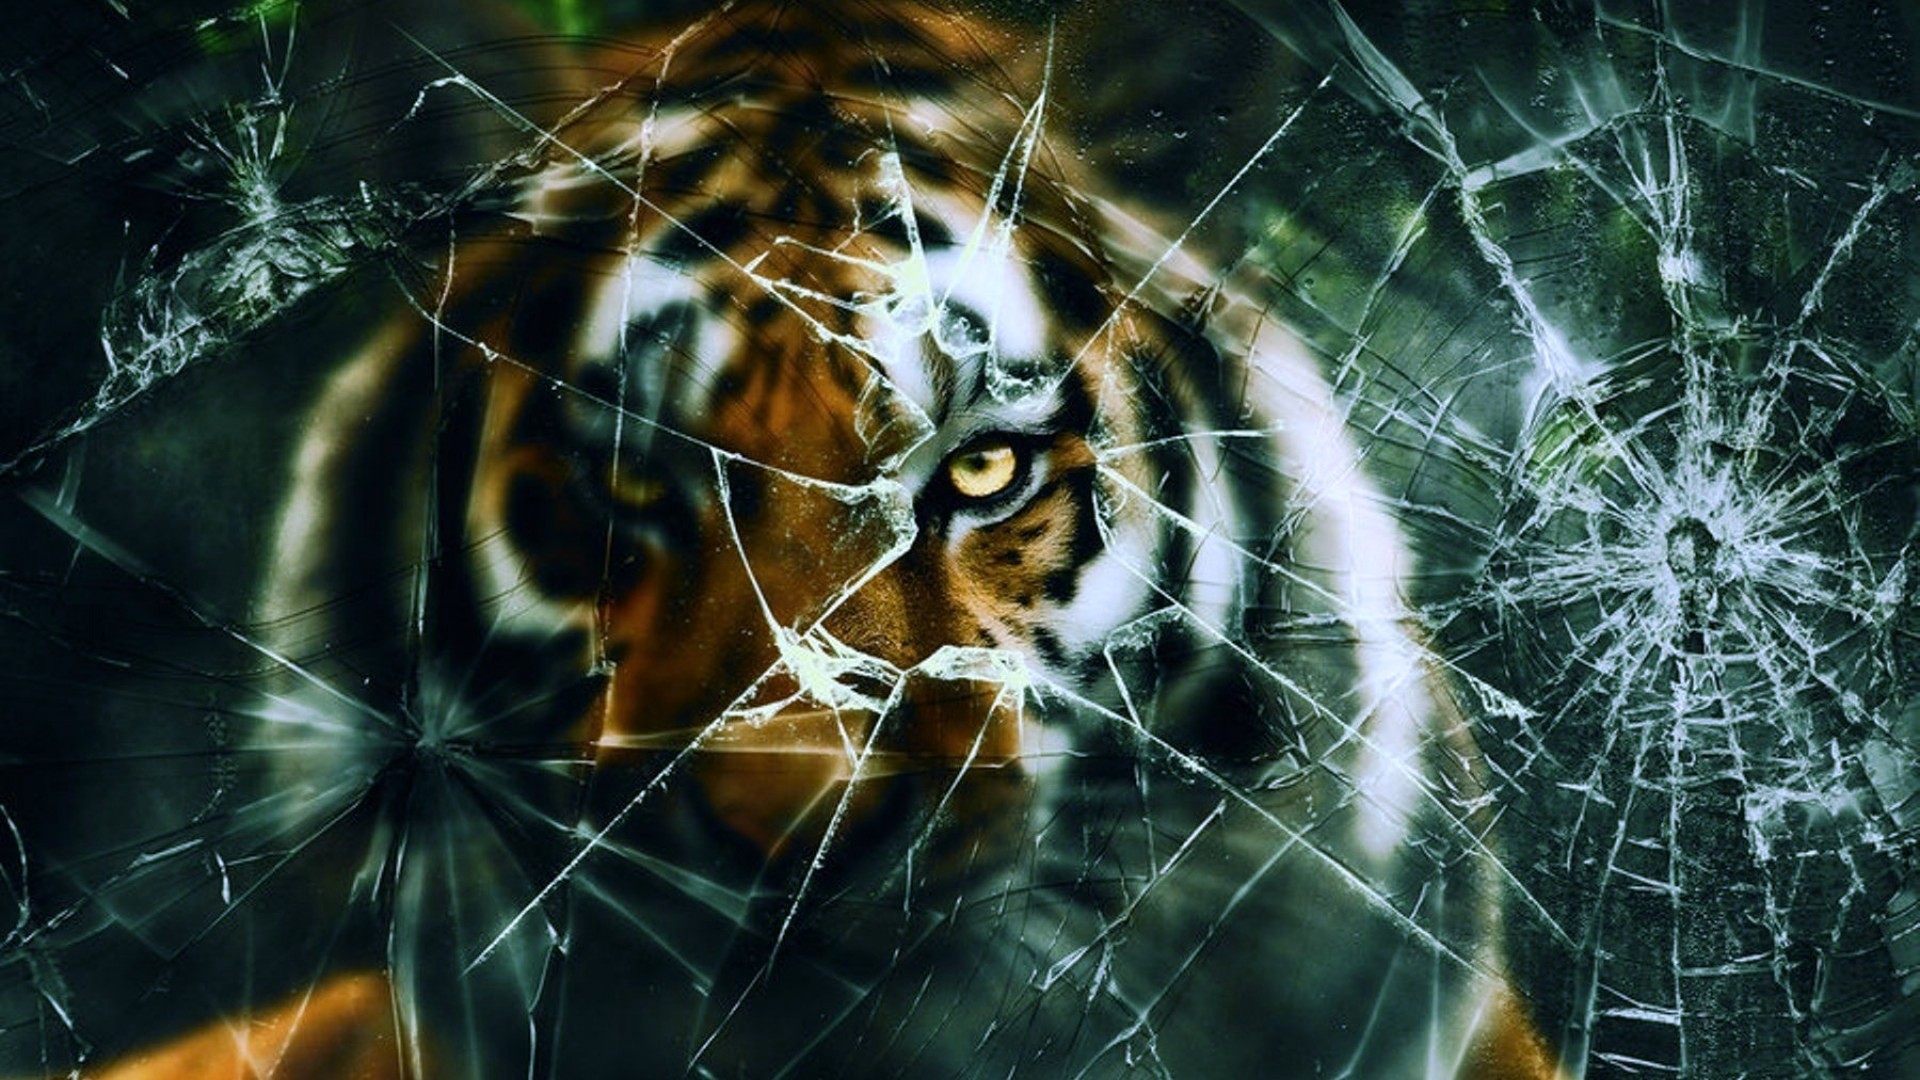 1920x1080 0 1920x1200 Screen Crack Wallpapers Group  Tiger Behind Cracked  Screen Wallpaper Wallpaper Zone